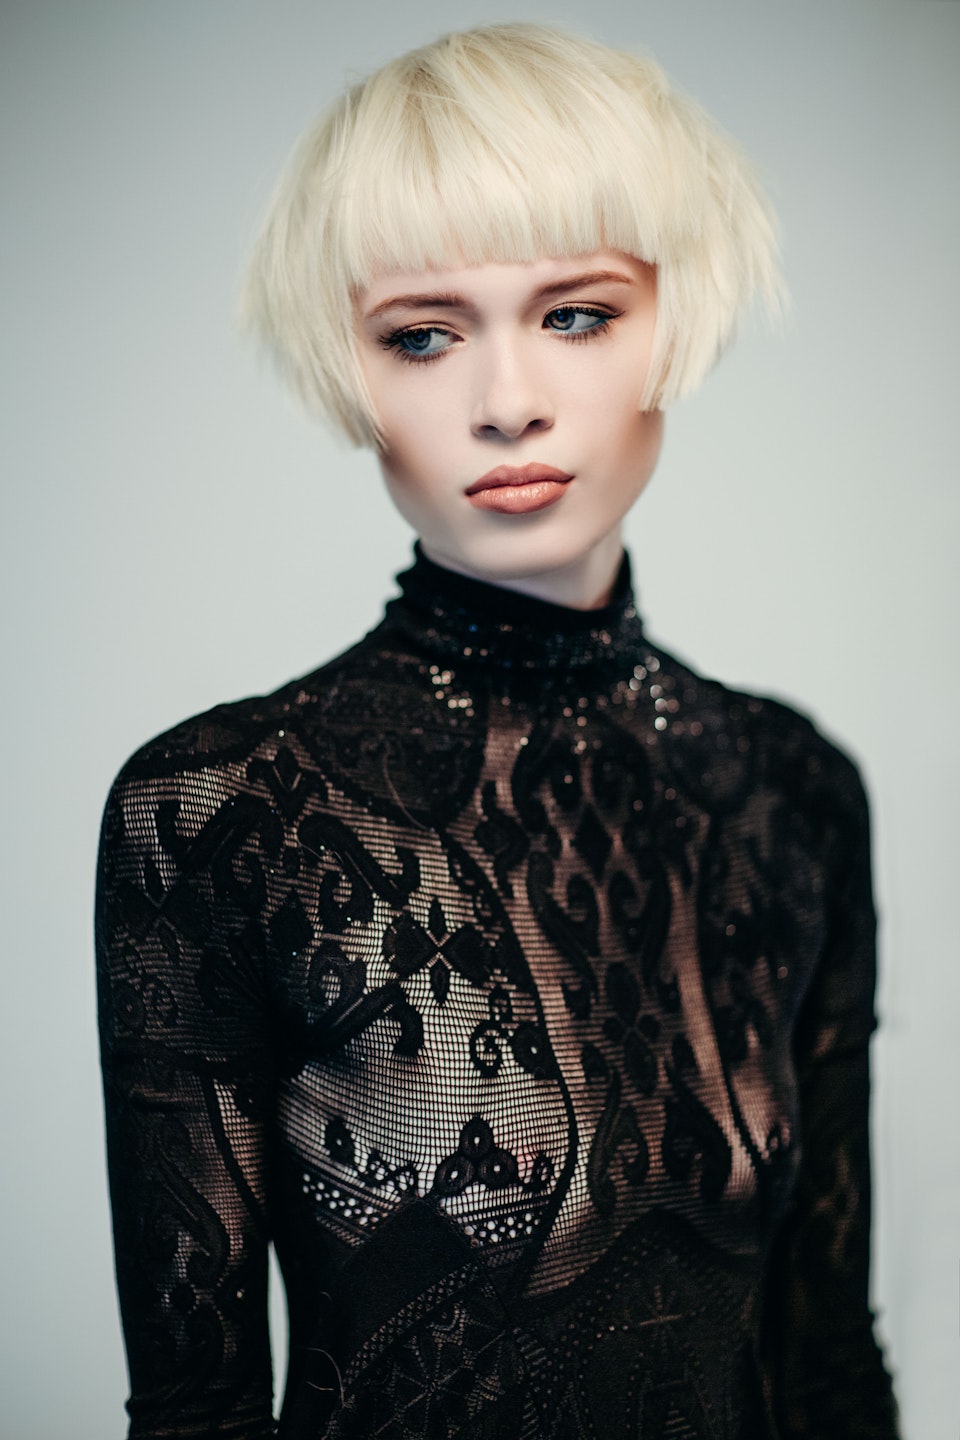 JARRED Photography - DEAN JONES HAIRDRESSING COLLECTION